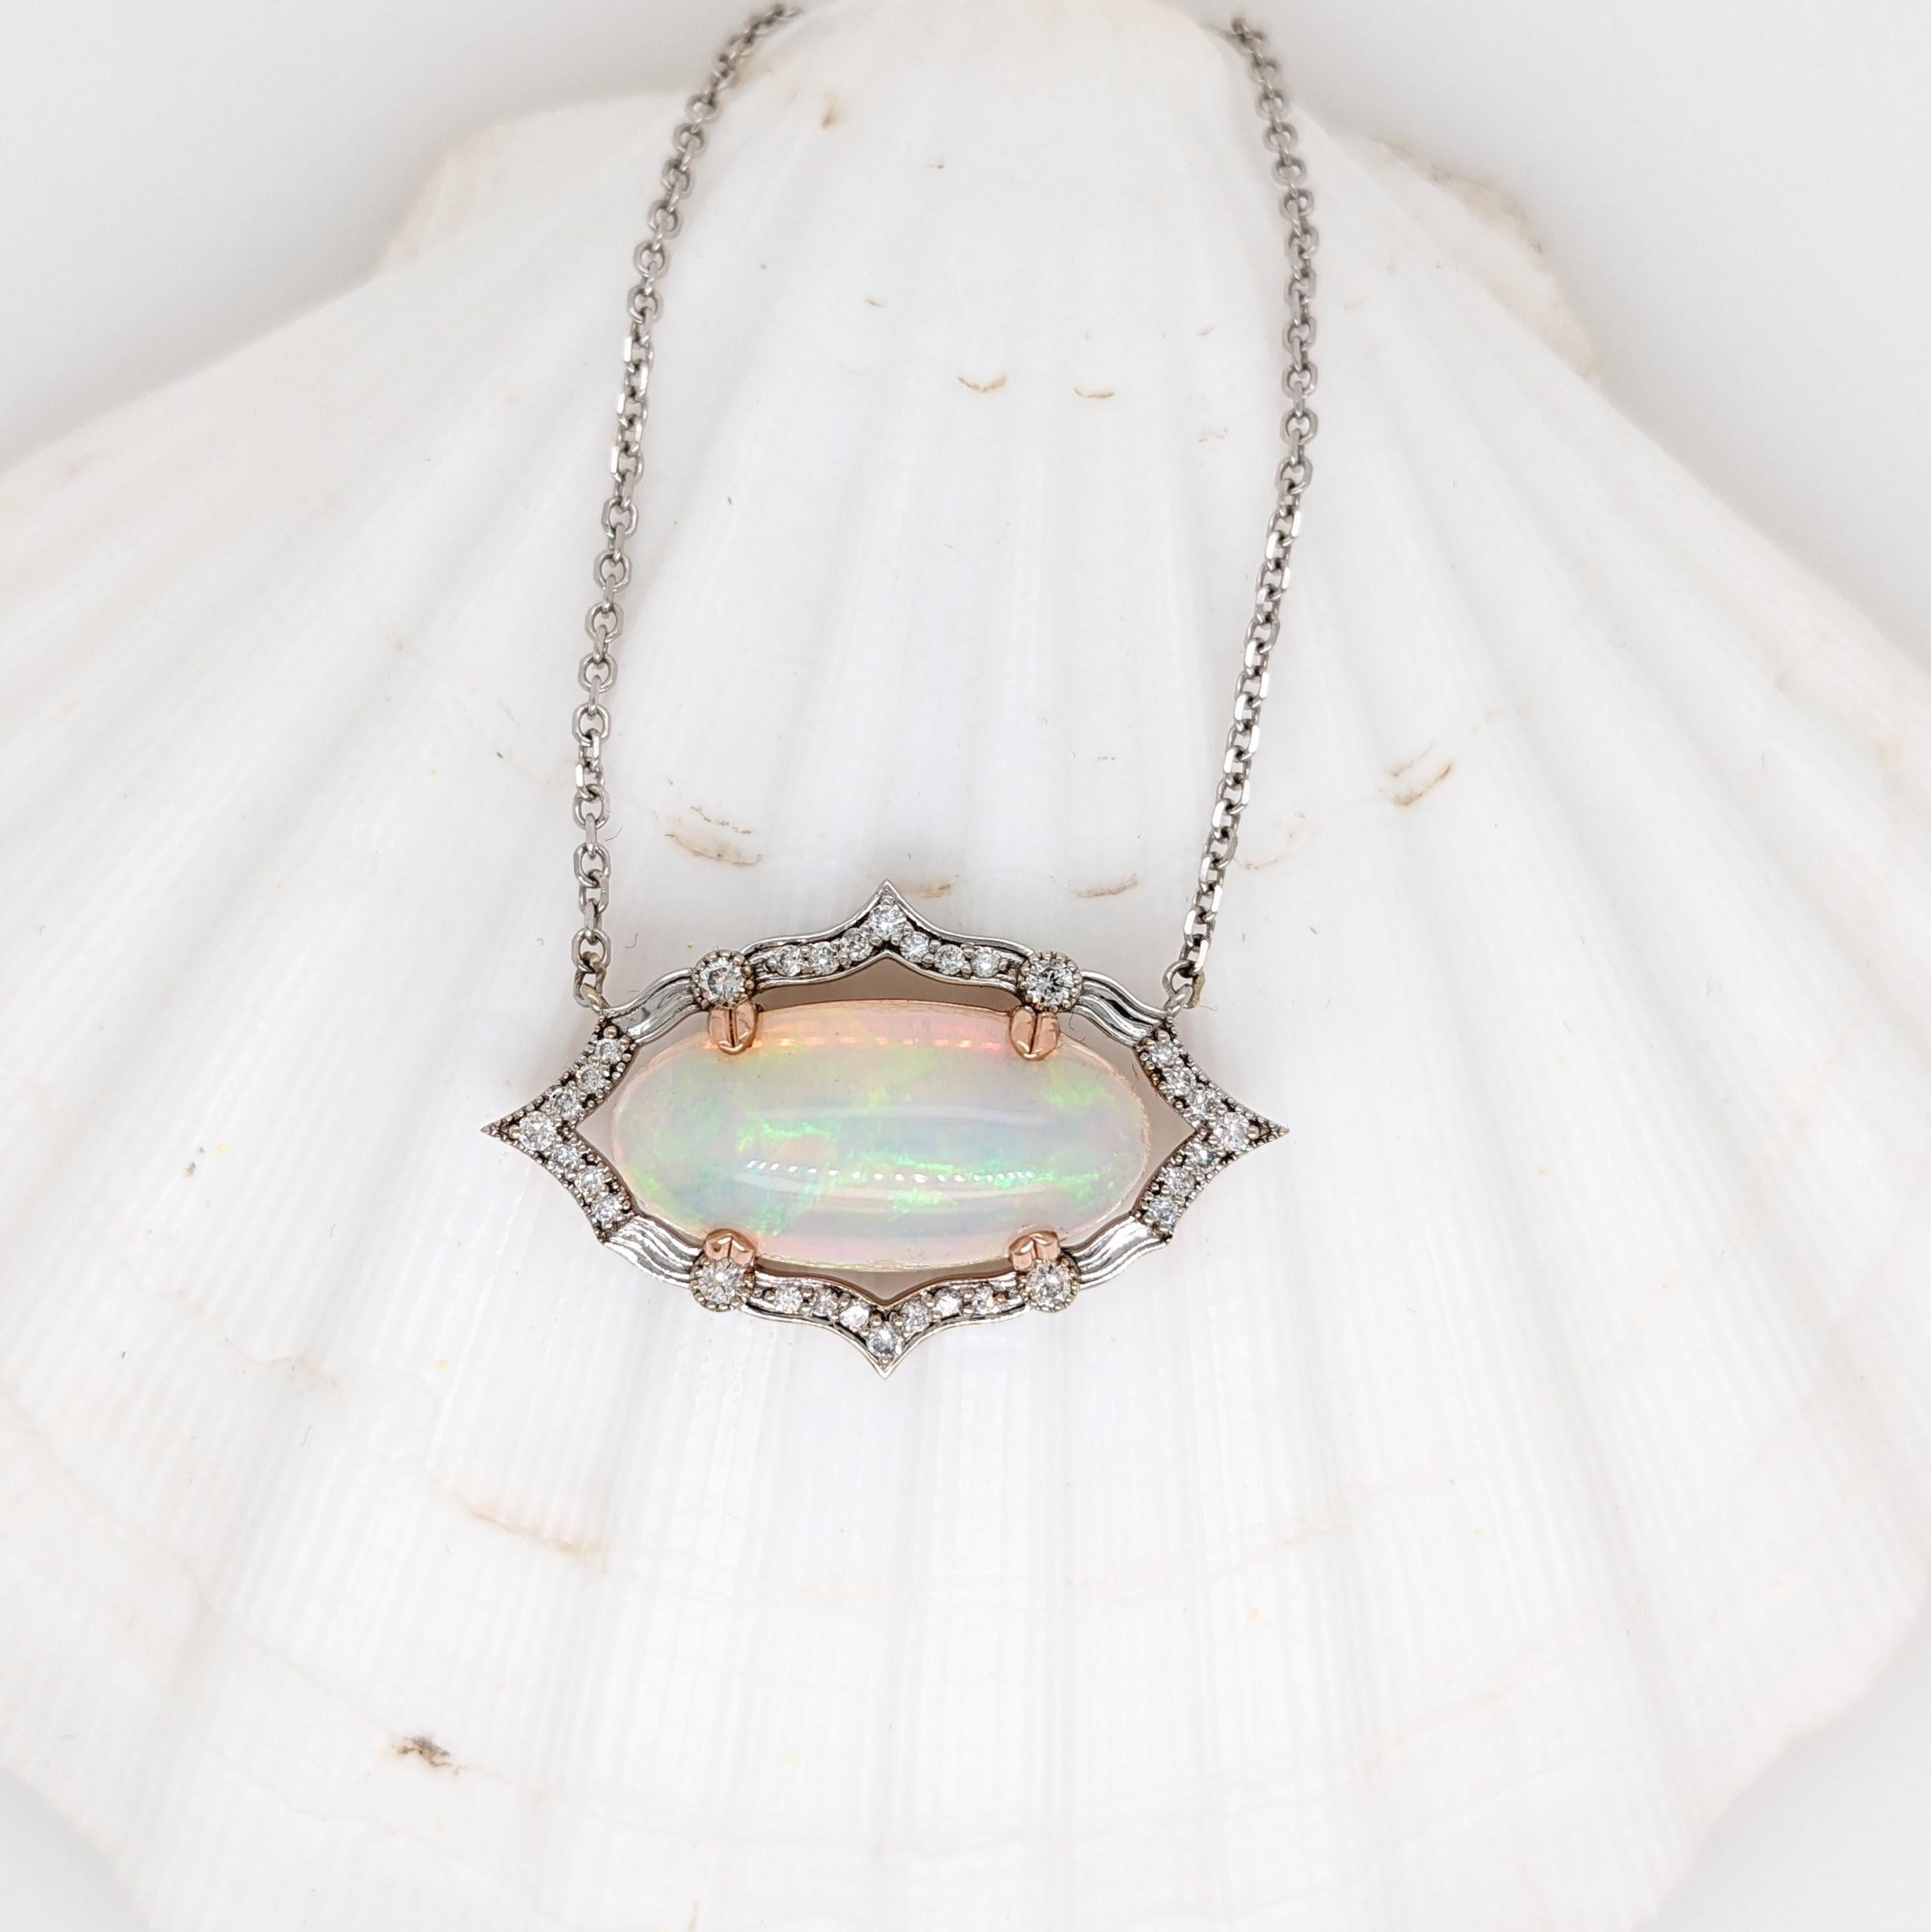 Specifications

Item Type: Pendant
Stone: Opal
Origin: Ethiopia
Treatment: None
Hardness: 6
Cut: Cabochon
Shape: Oval 
Stone size: 21x10mm
Opal weight: 8.49cts
Metal: Solid 14k/5.11 gms
Diamonds S/I GH: 32/0.37cts

Introducing our breathtaking 9